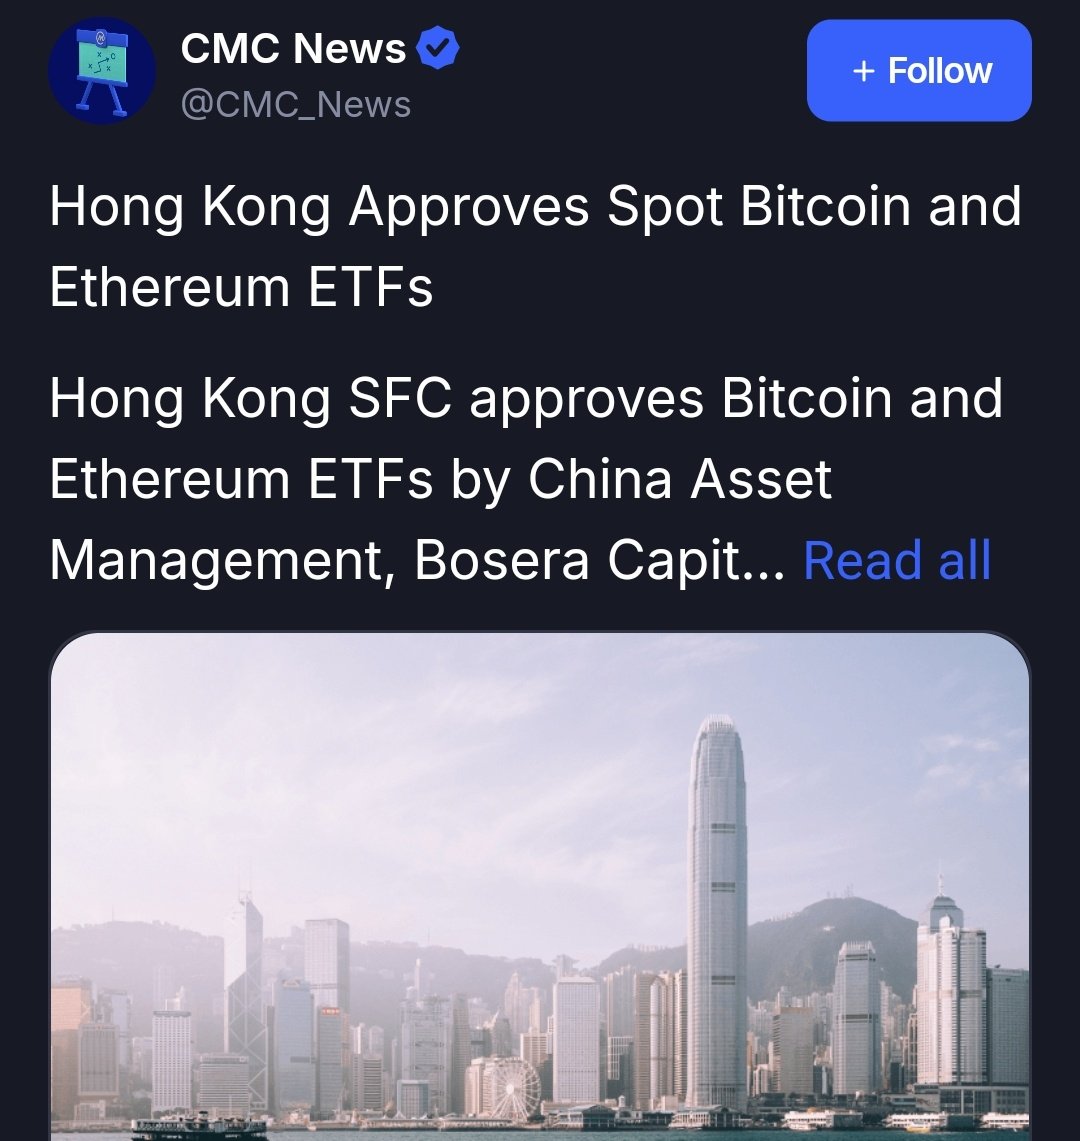 Breaking ‼️ News emerging from Hong Kong indicates China Asset Management, Bosera Capital, HashKey Capital Limited announced the approval of both spot Bitcoin (BTC) and Ethereum (ETH) exchange-traded funds (ETFs) applications by Hong Kong Securities and Futures Commission (SFC)